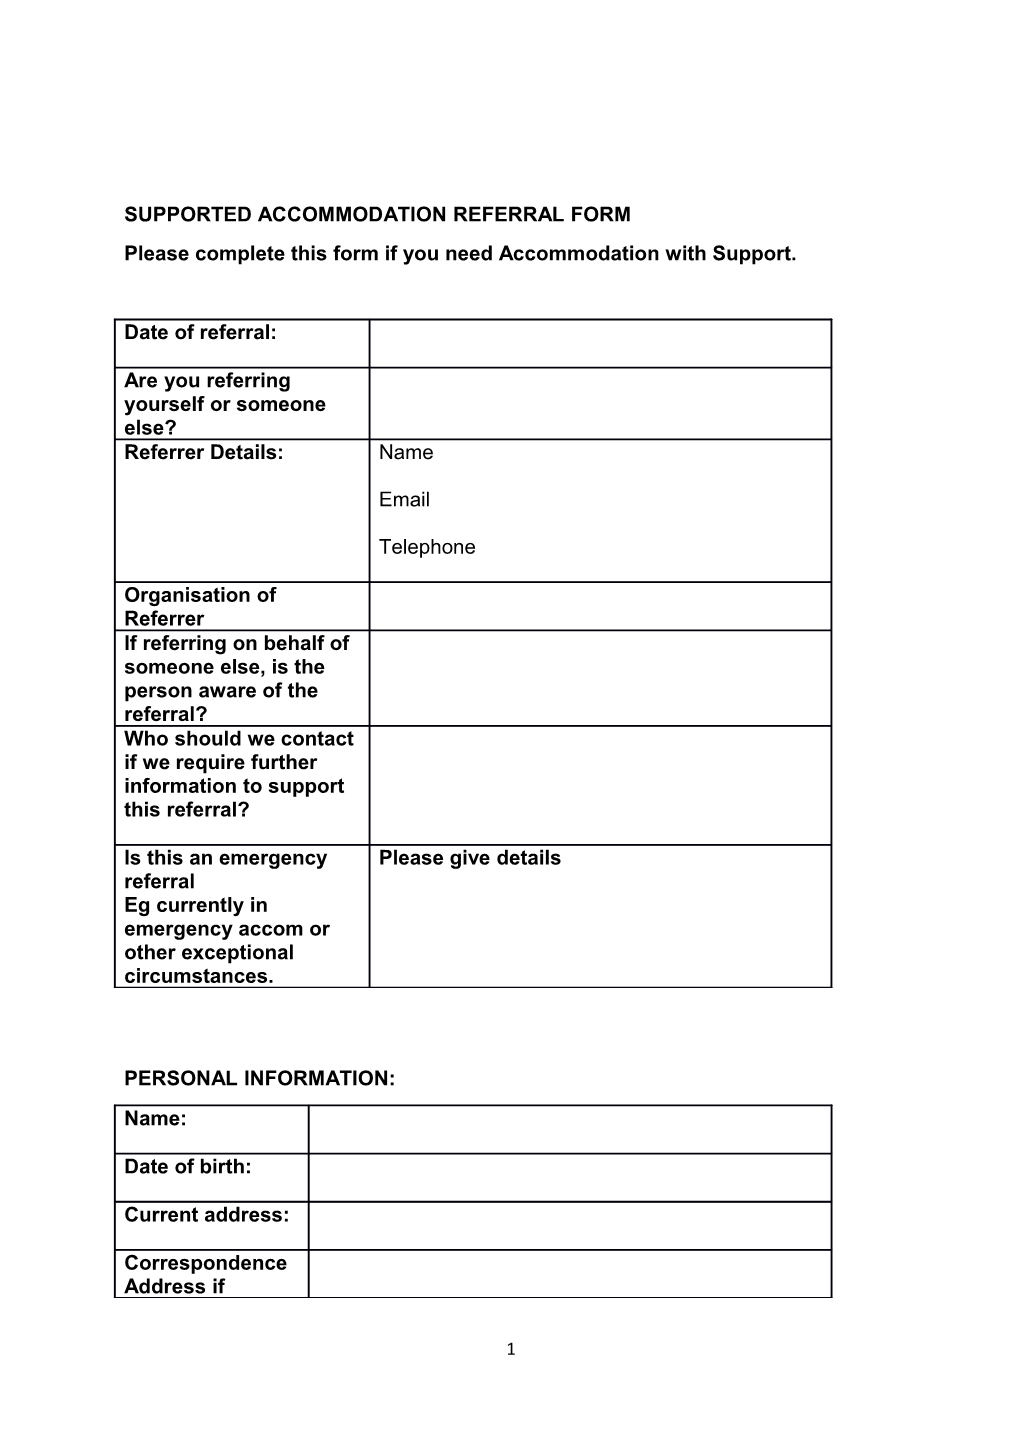 Supported Accommodation Referral Form